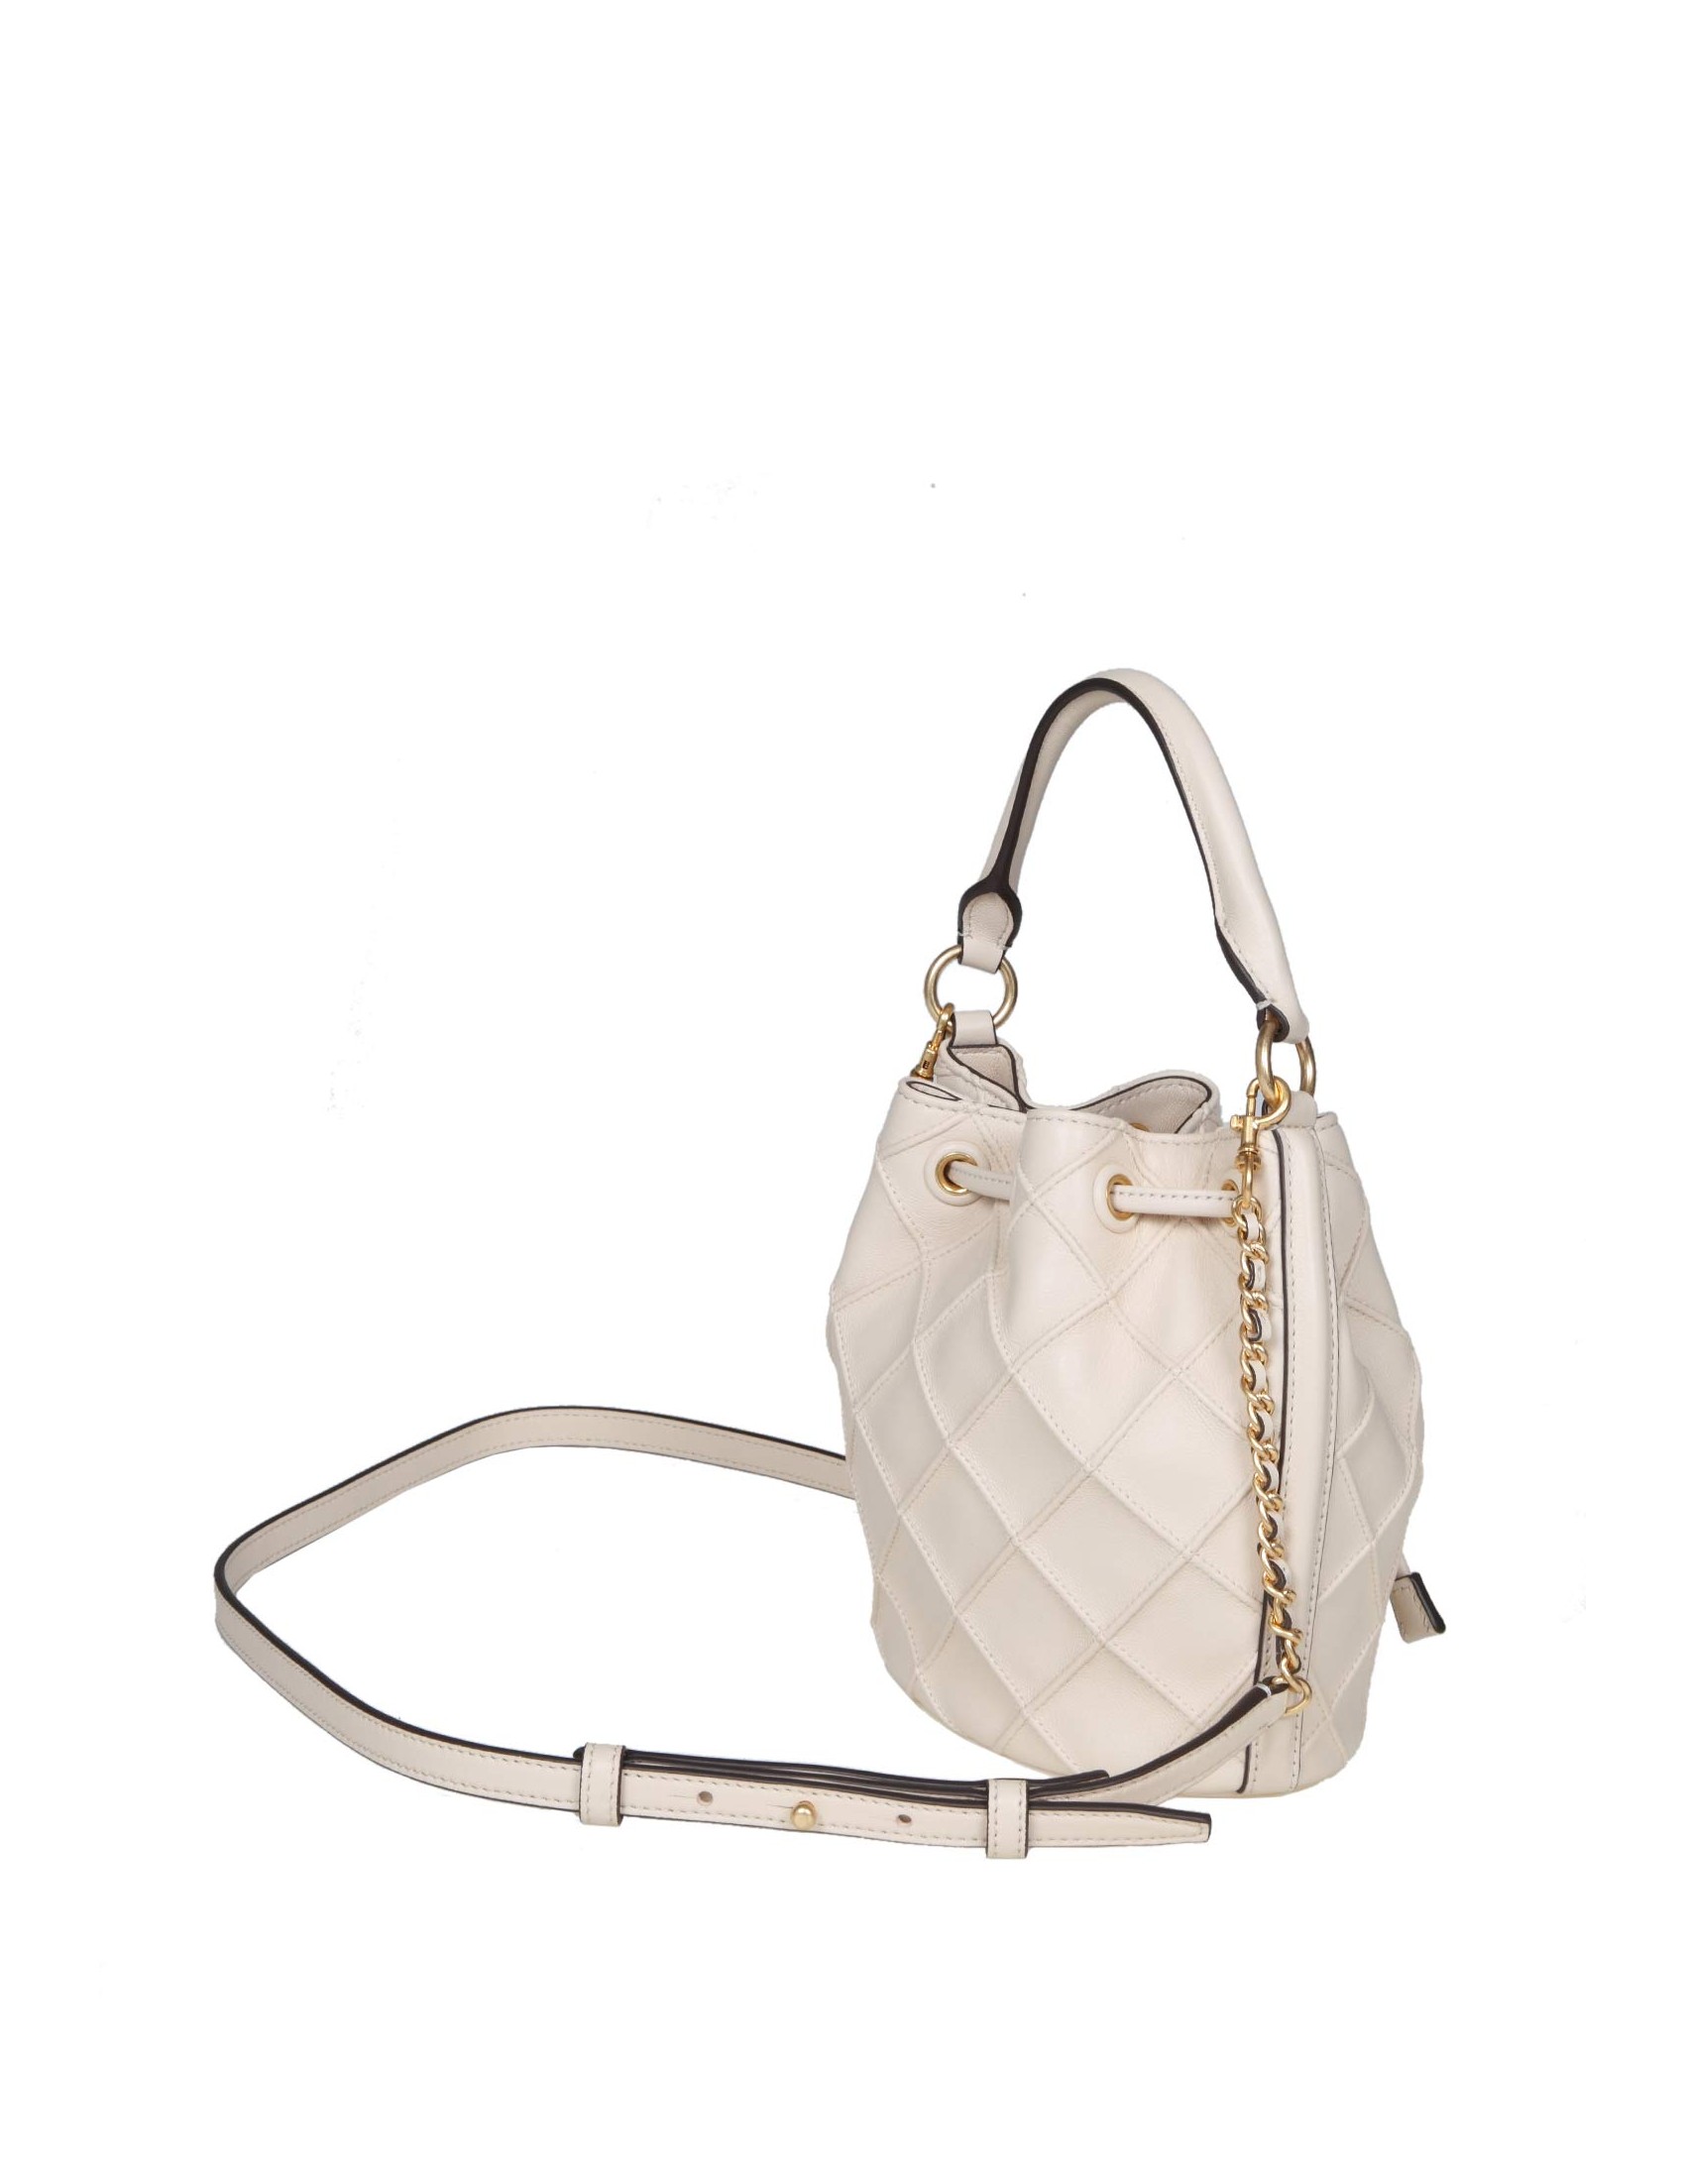 TORY BURCH FLEMING SOFT BUCKET COLOR NEW CREAM